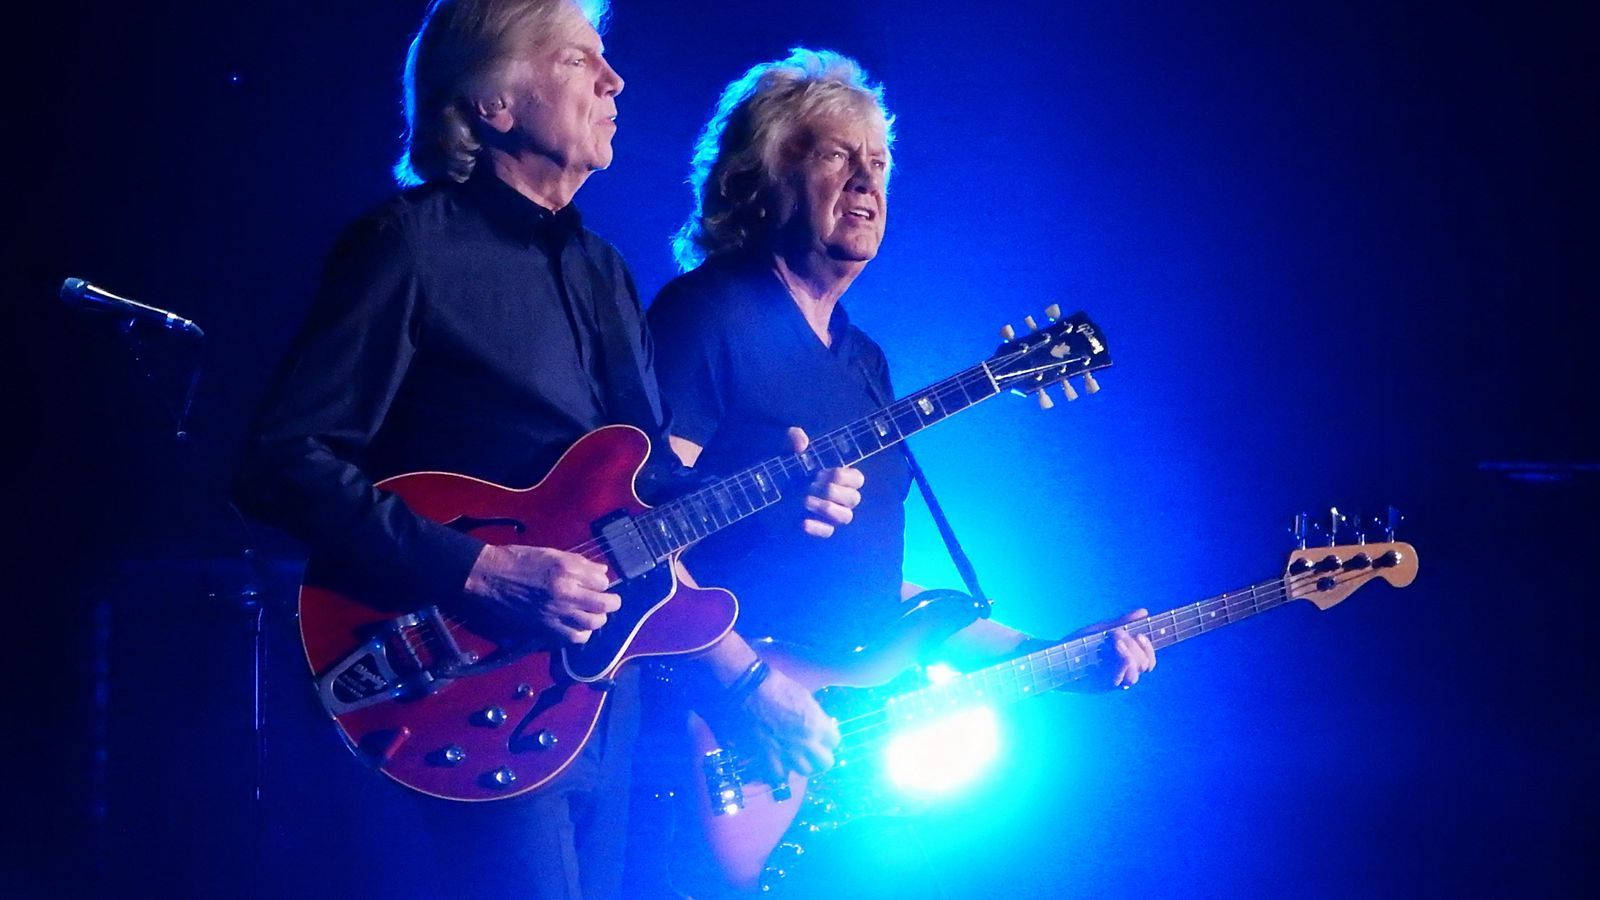 "Moody Blues performing live at Ruth Eckerd Hall in Clearwater" Wallpaper